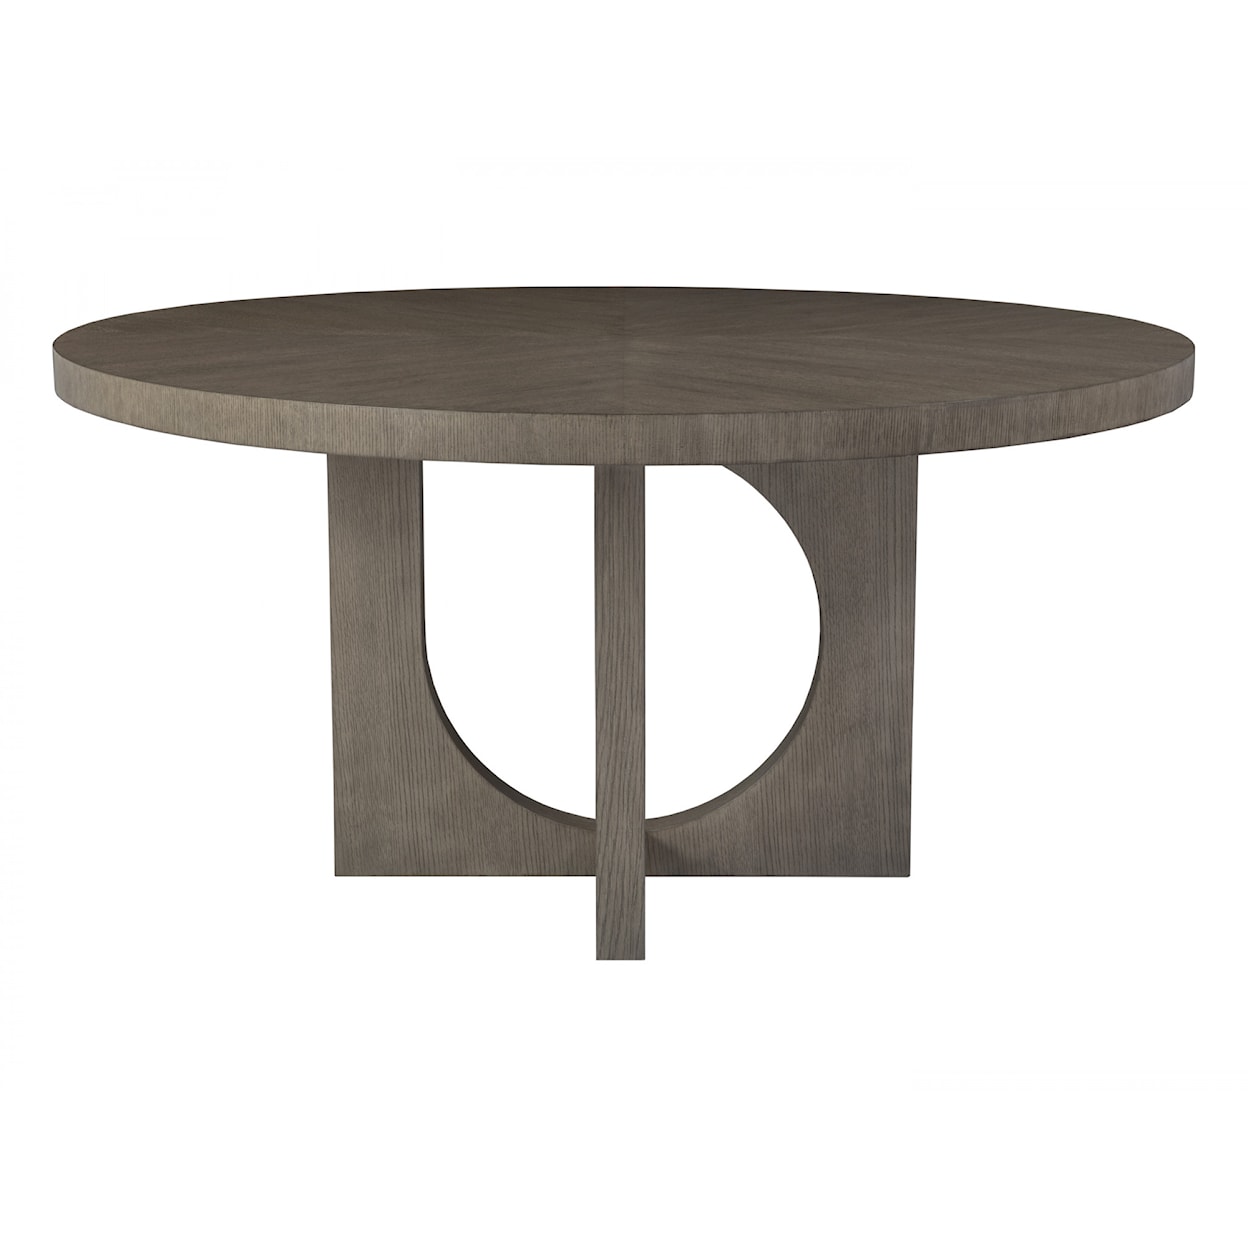 Artistica Apostrophe Round Dining Table